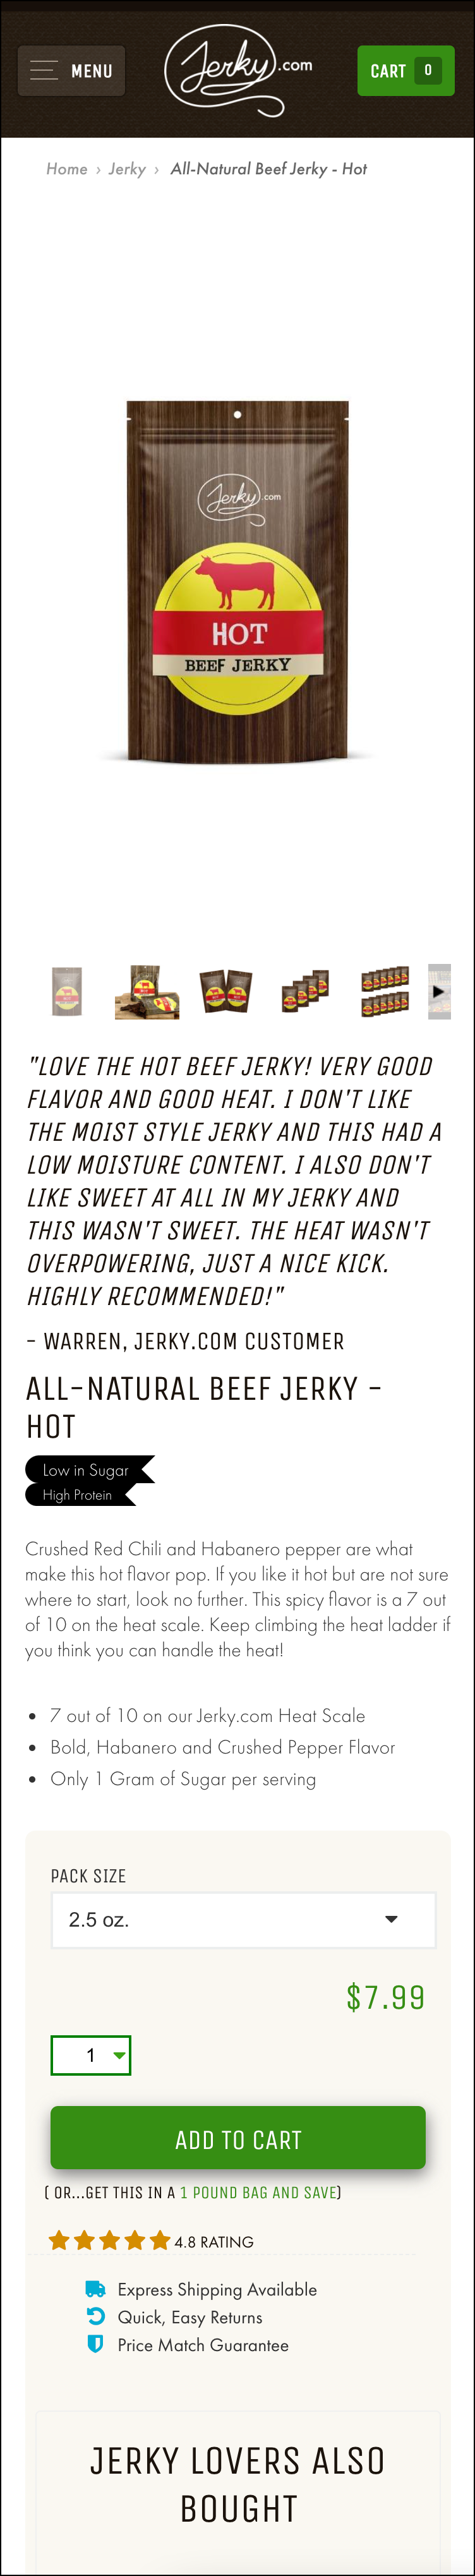 How Jerky.com can used personalized experiences to boost site conversions.